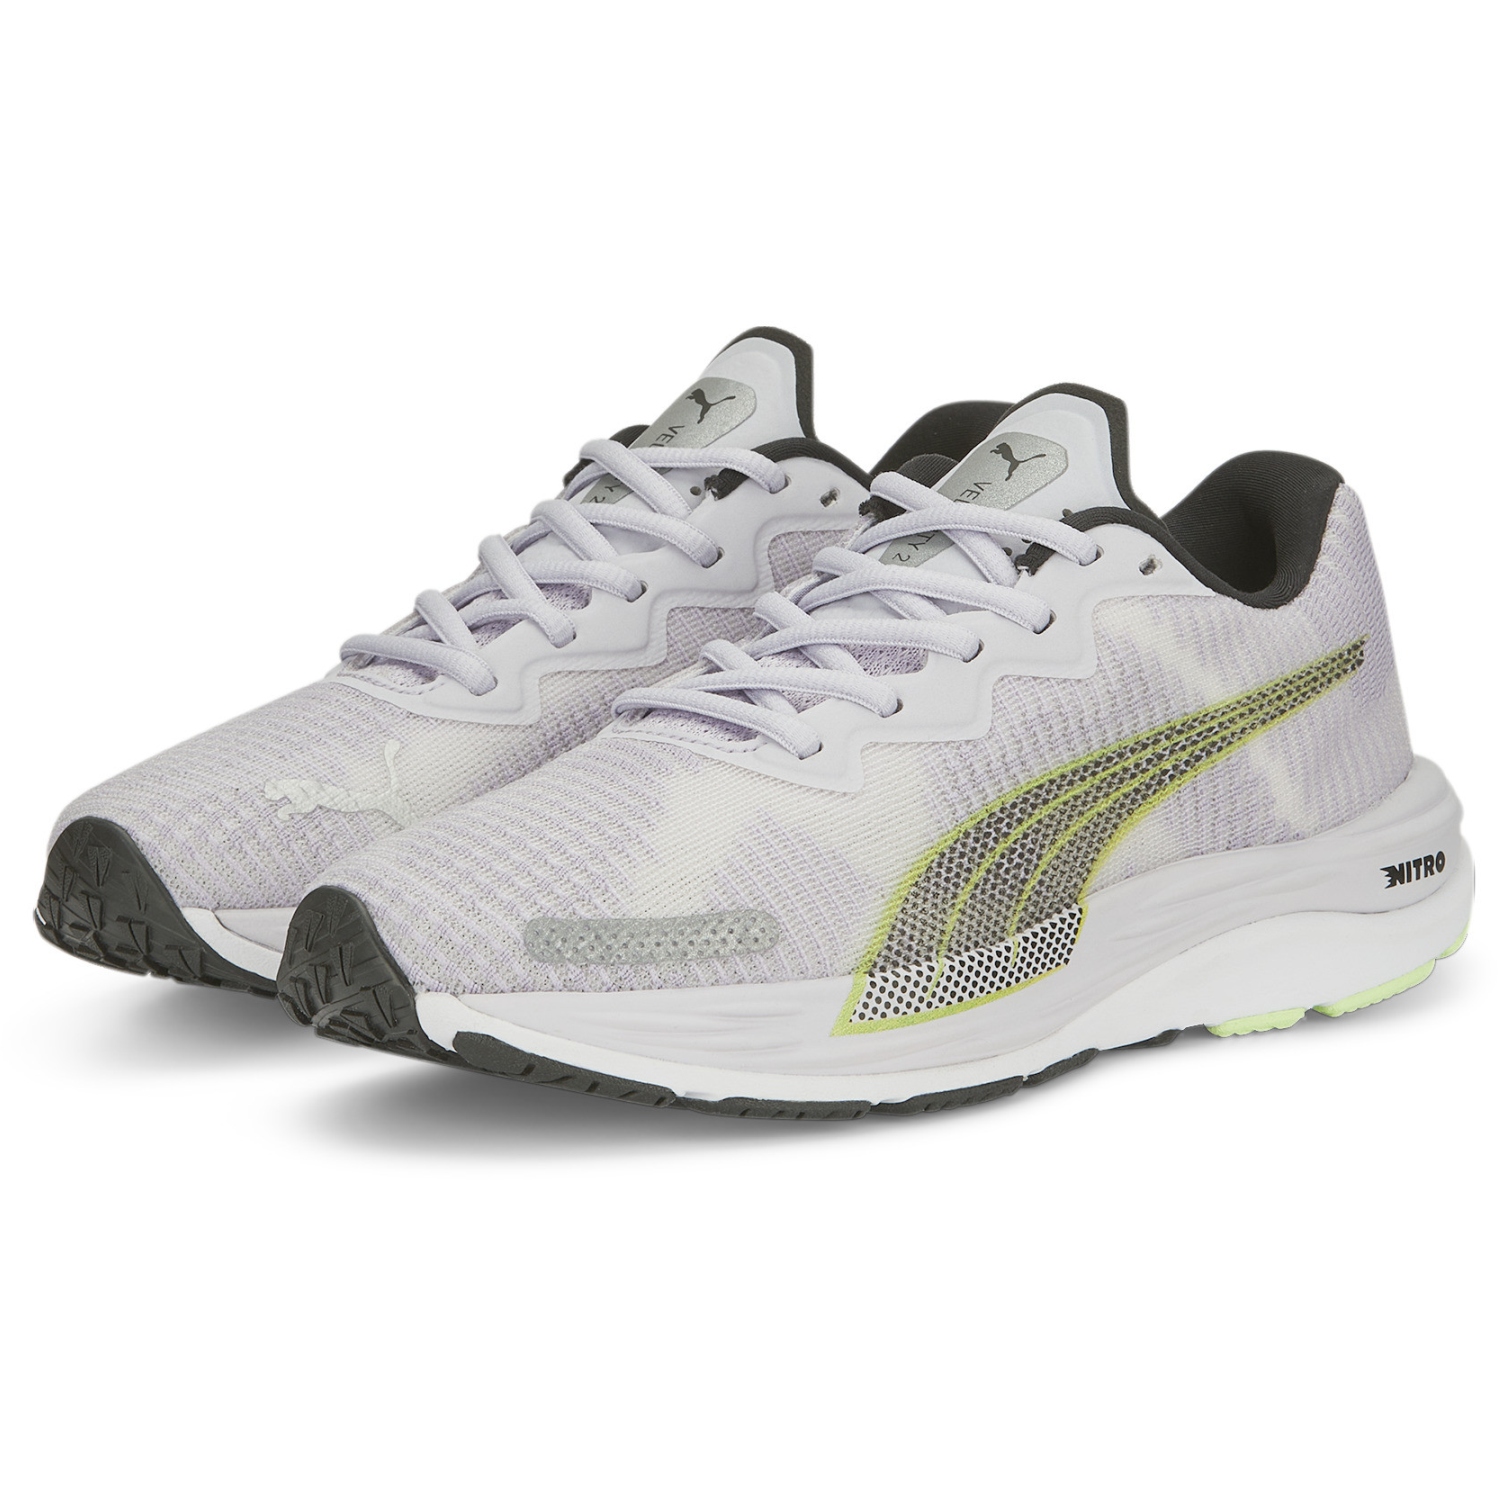 Picture of Puma Velocity Nitro 2 Fade Running Shoes Women - Spring Lavender-Puma Black-Fizzy Lime